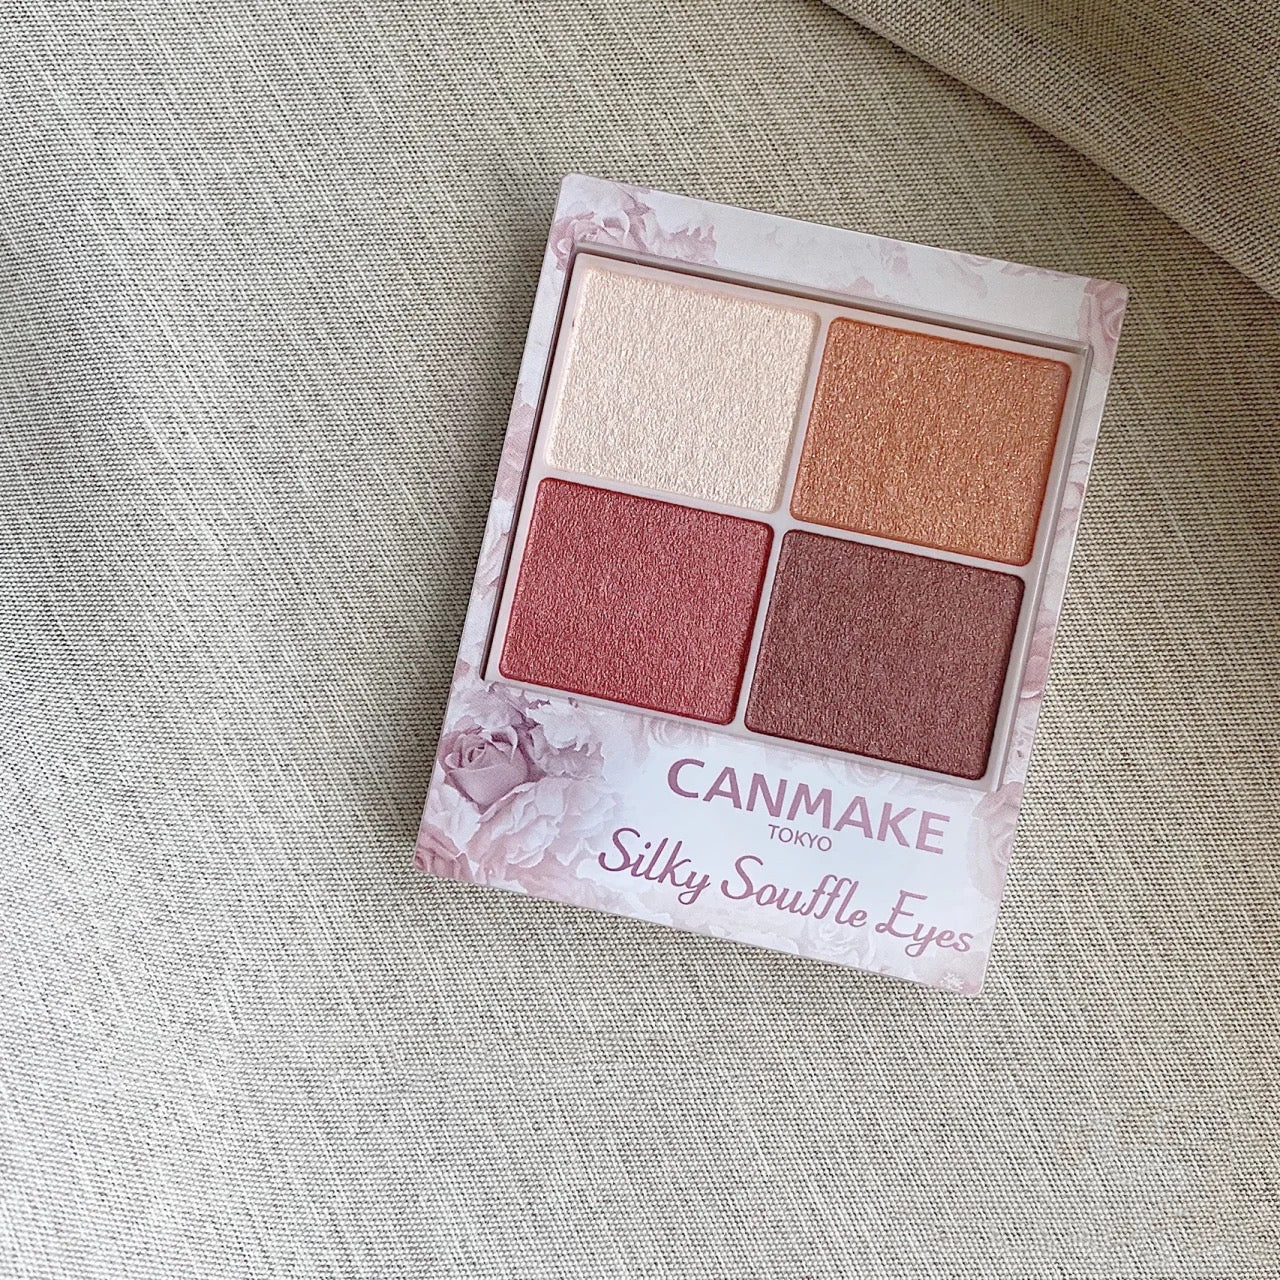 CANMAKE Silky Souffle Eyes #04 Sunset Date